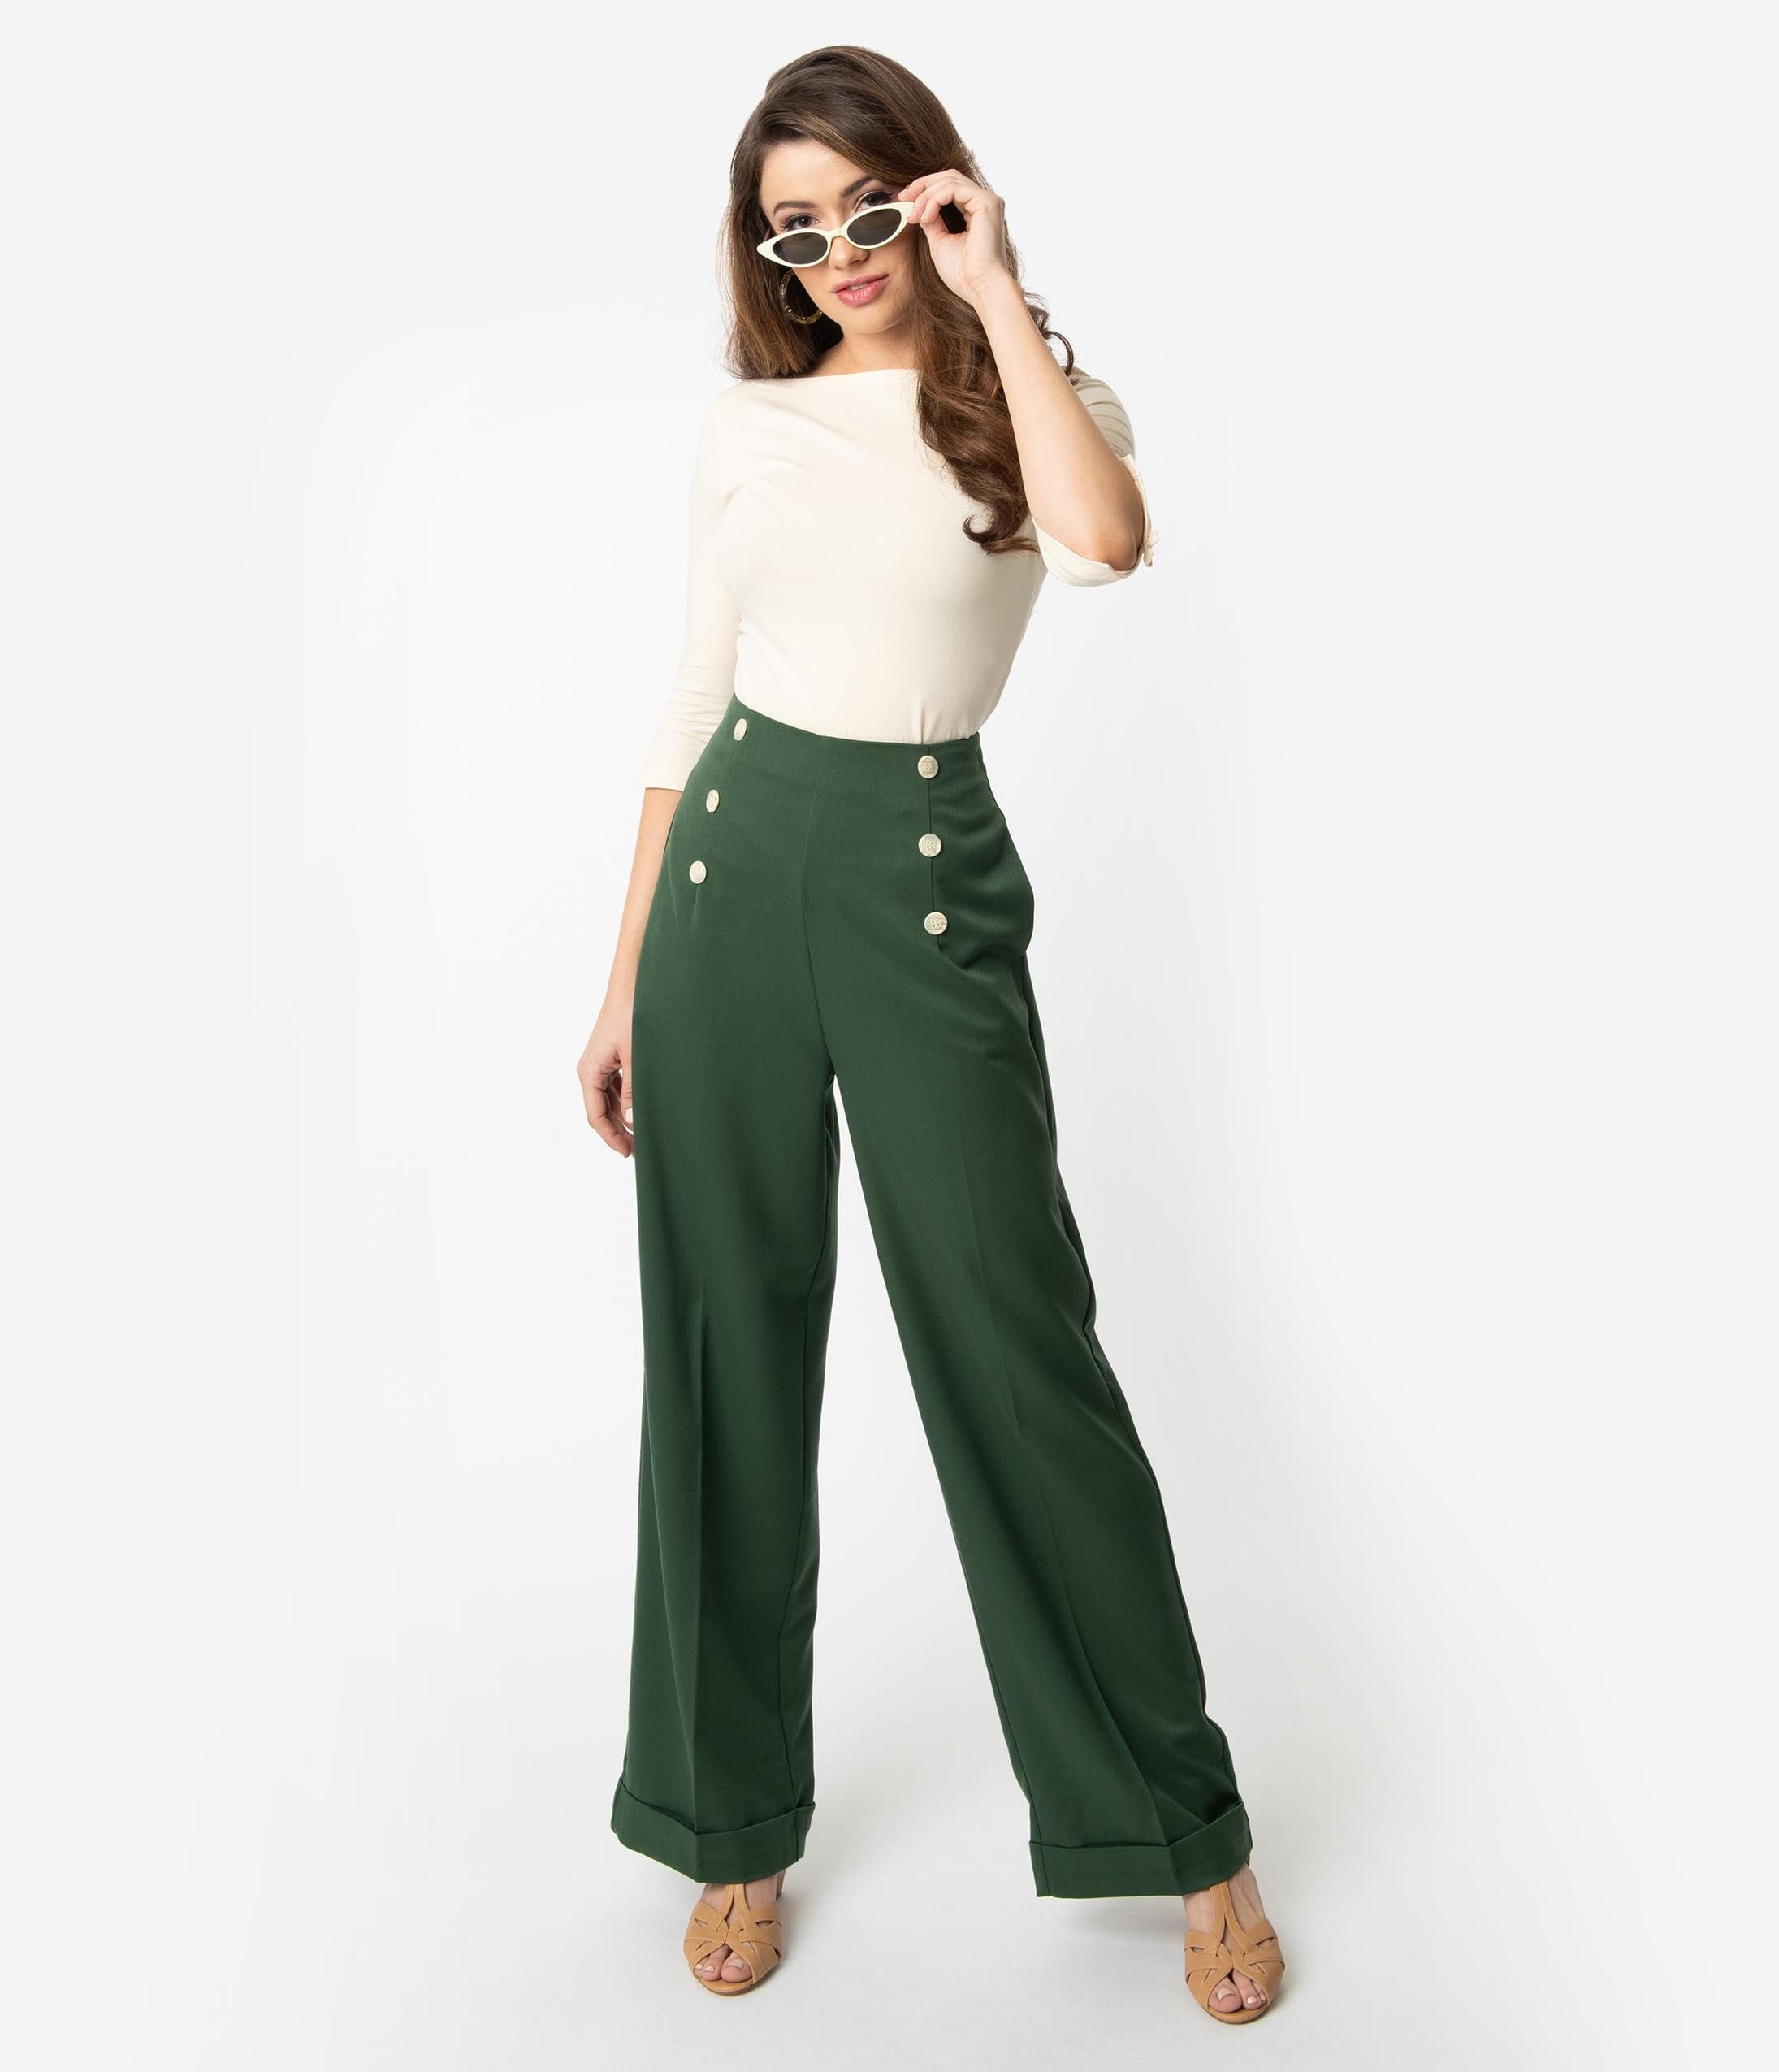 Women's 1940s Pants Styles- History and Buying Guide